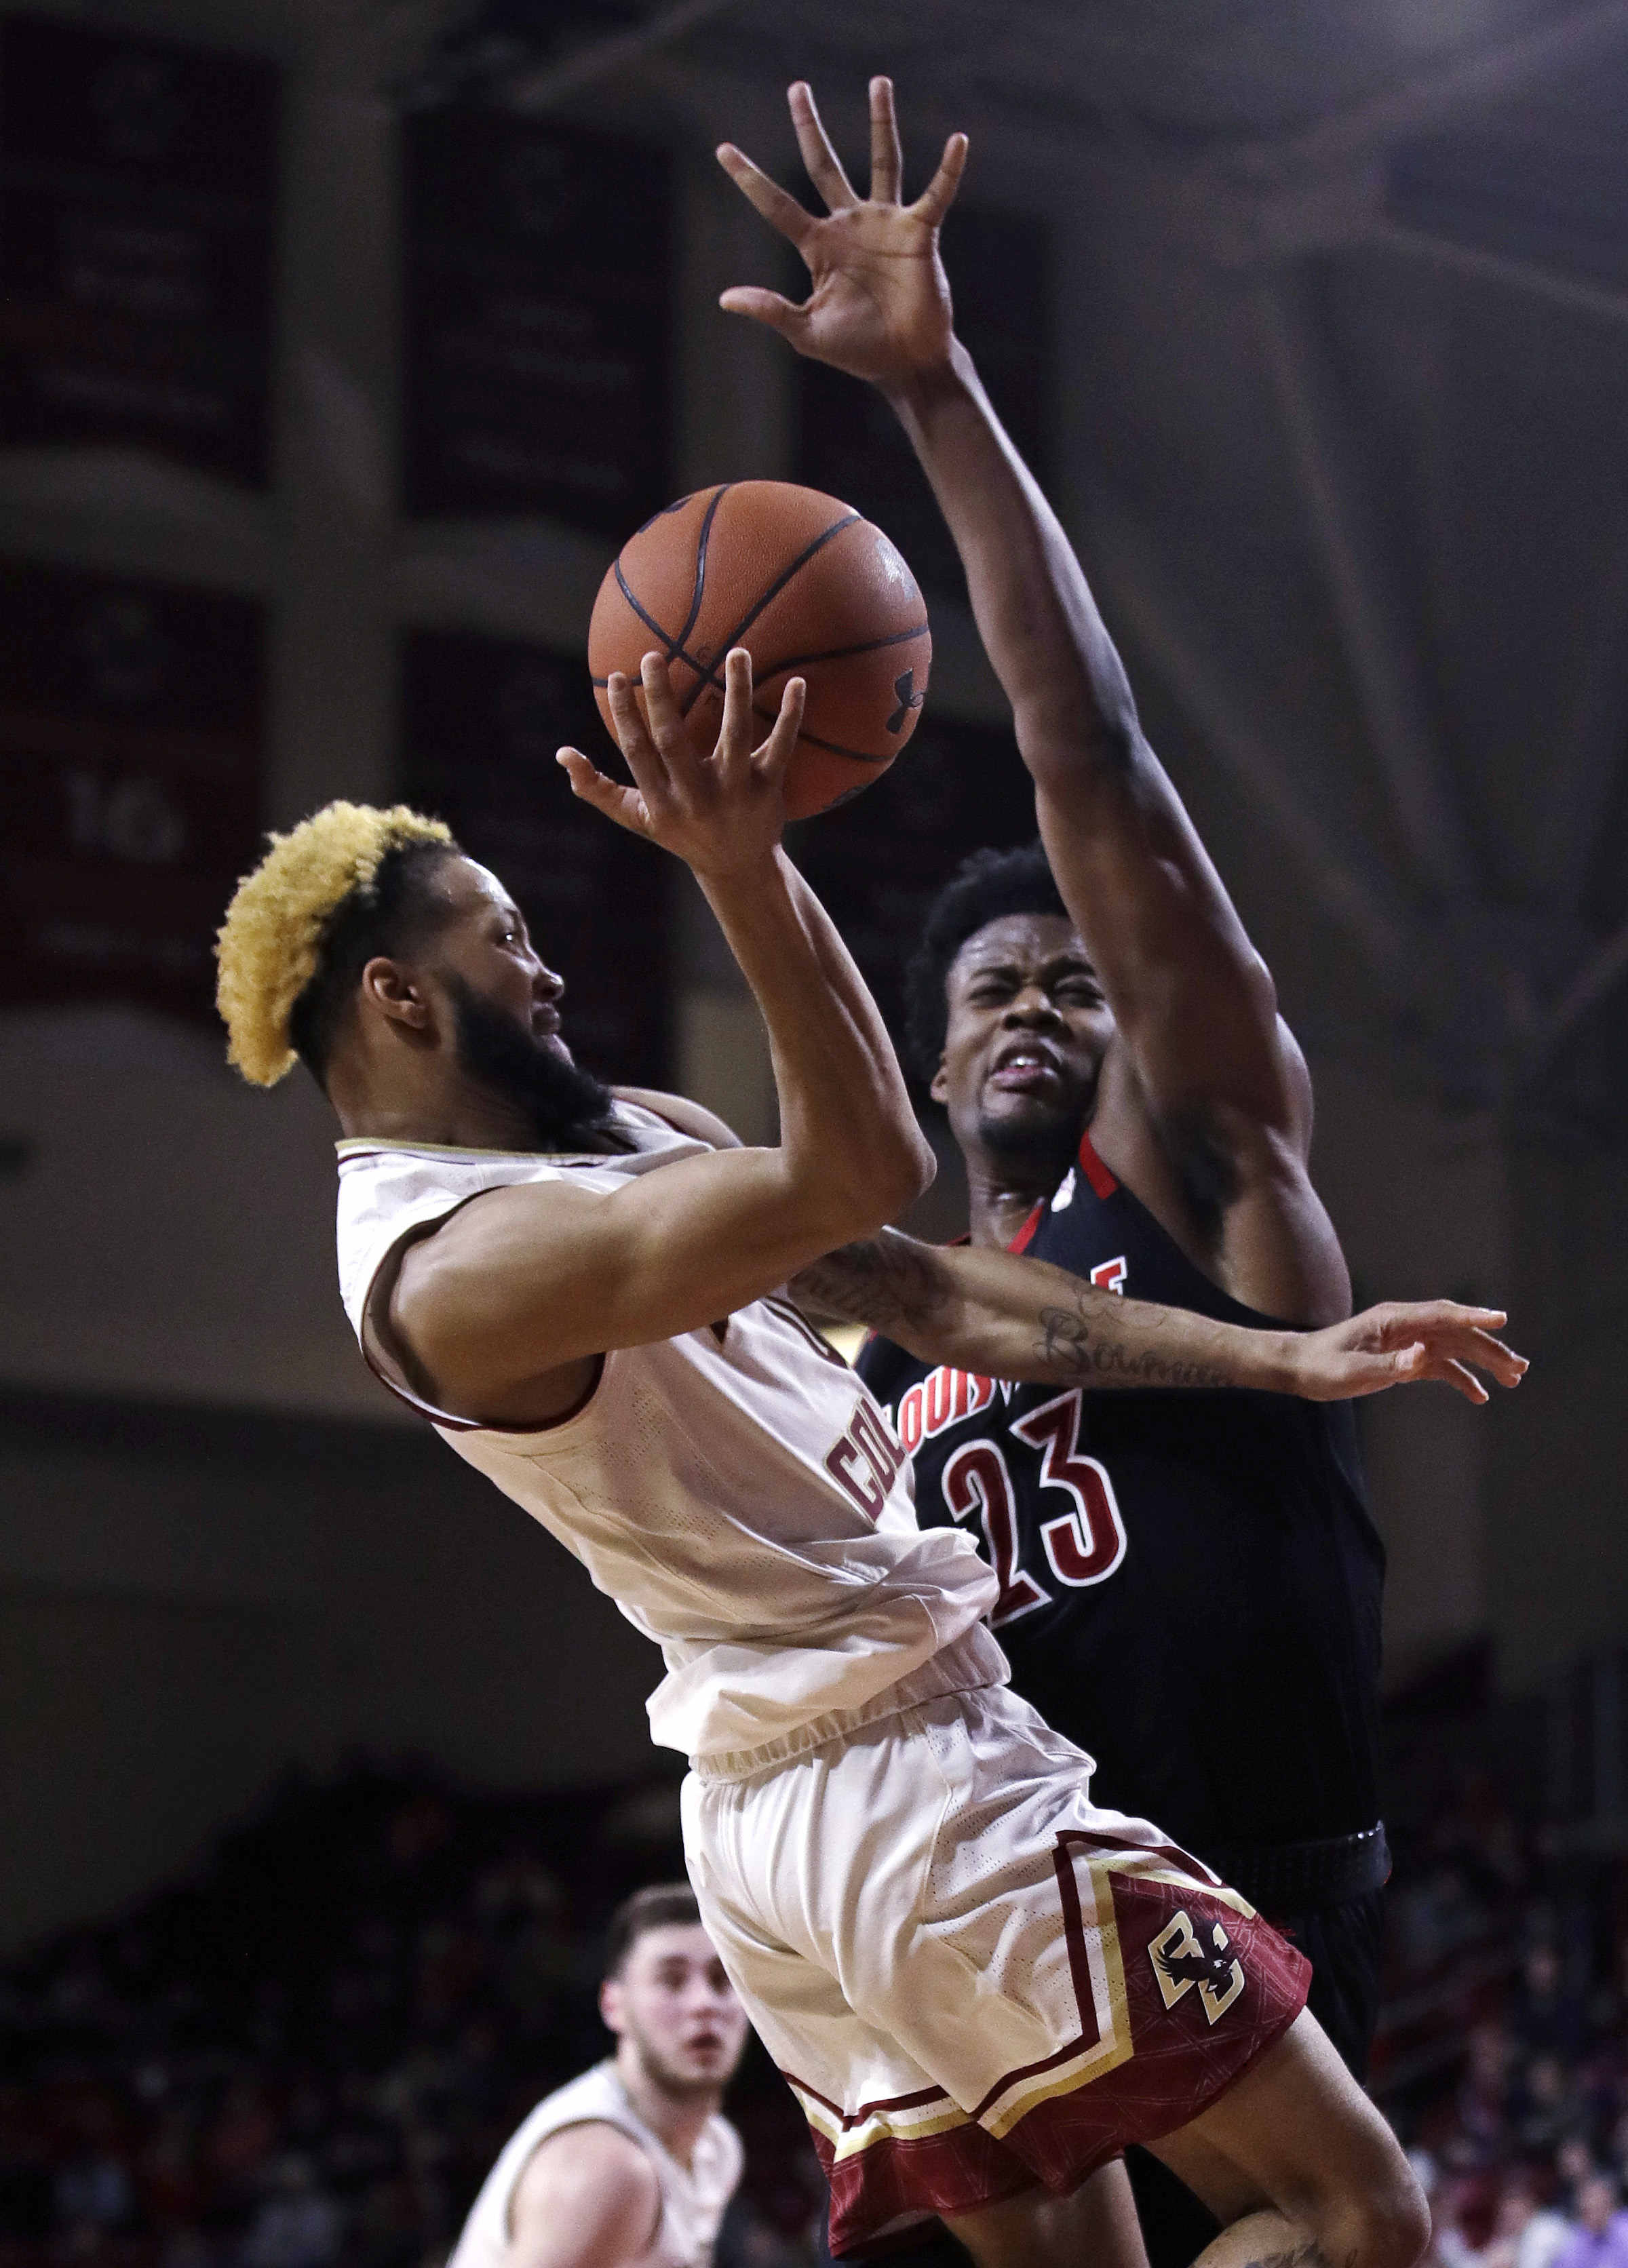 Bowman leads Boston College to 66-59 victory over Louisville